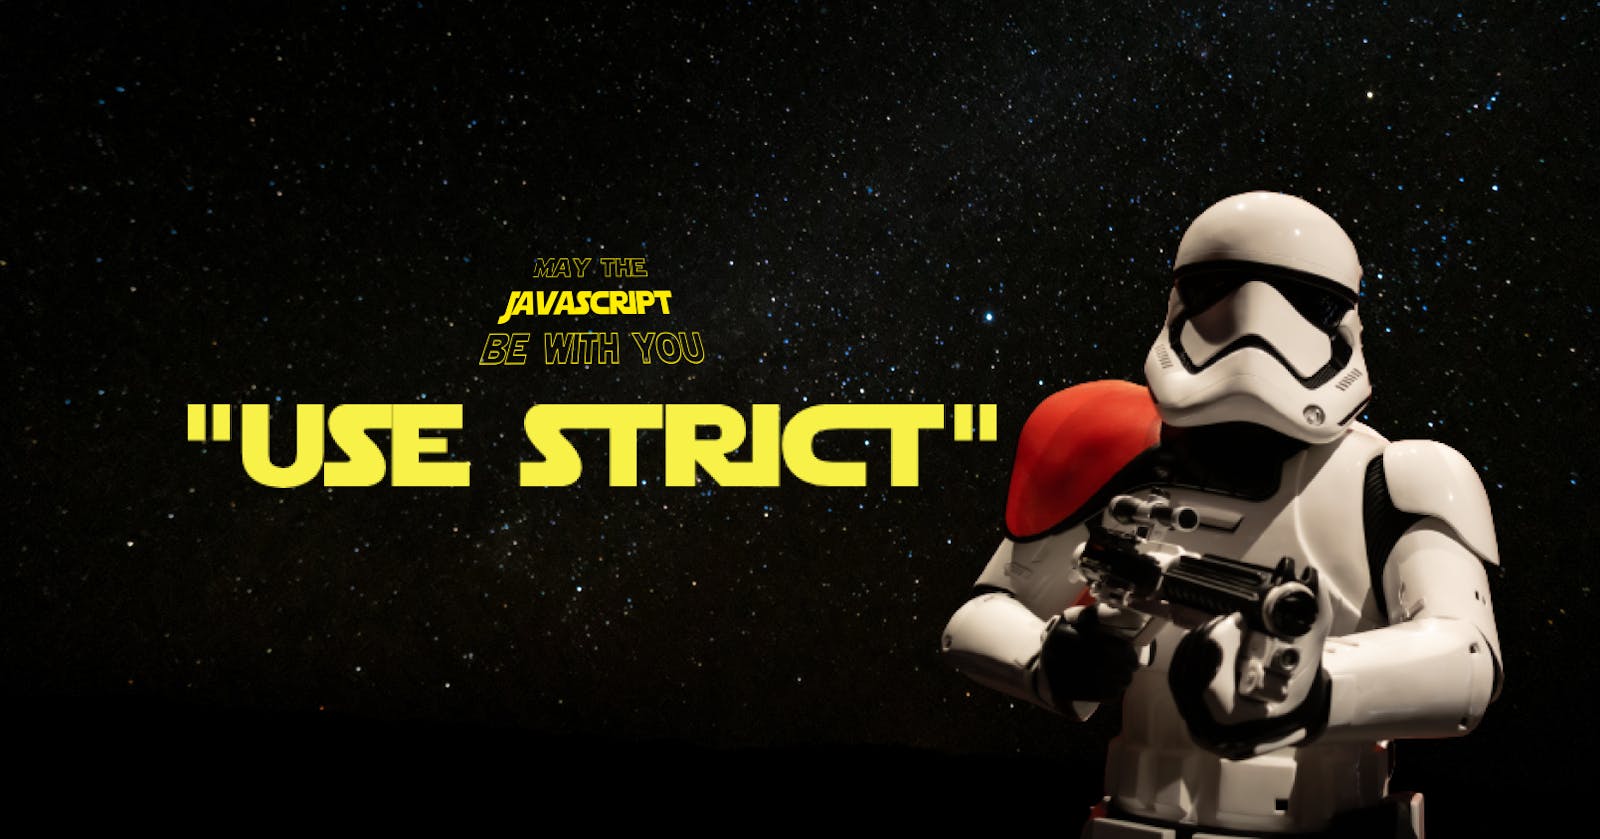 JS Series: EP. (II) - May the "use strict" be with you.